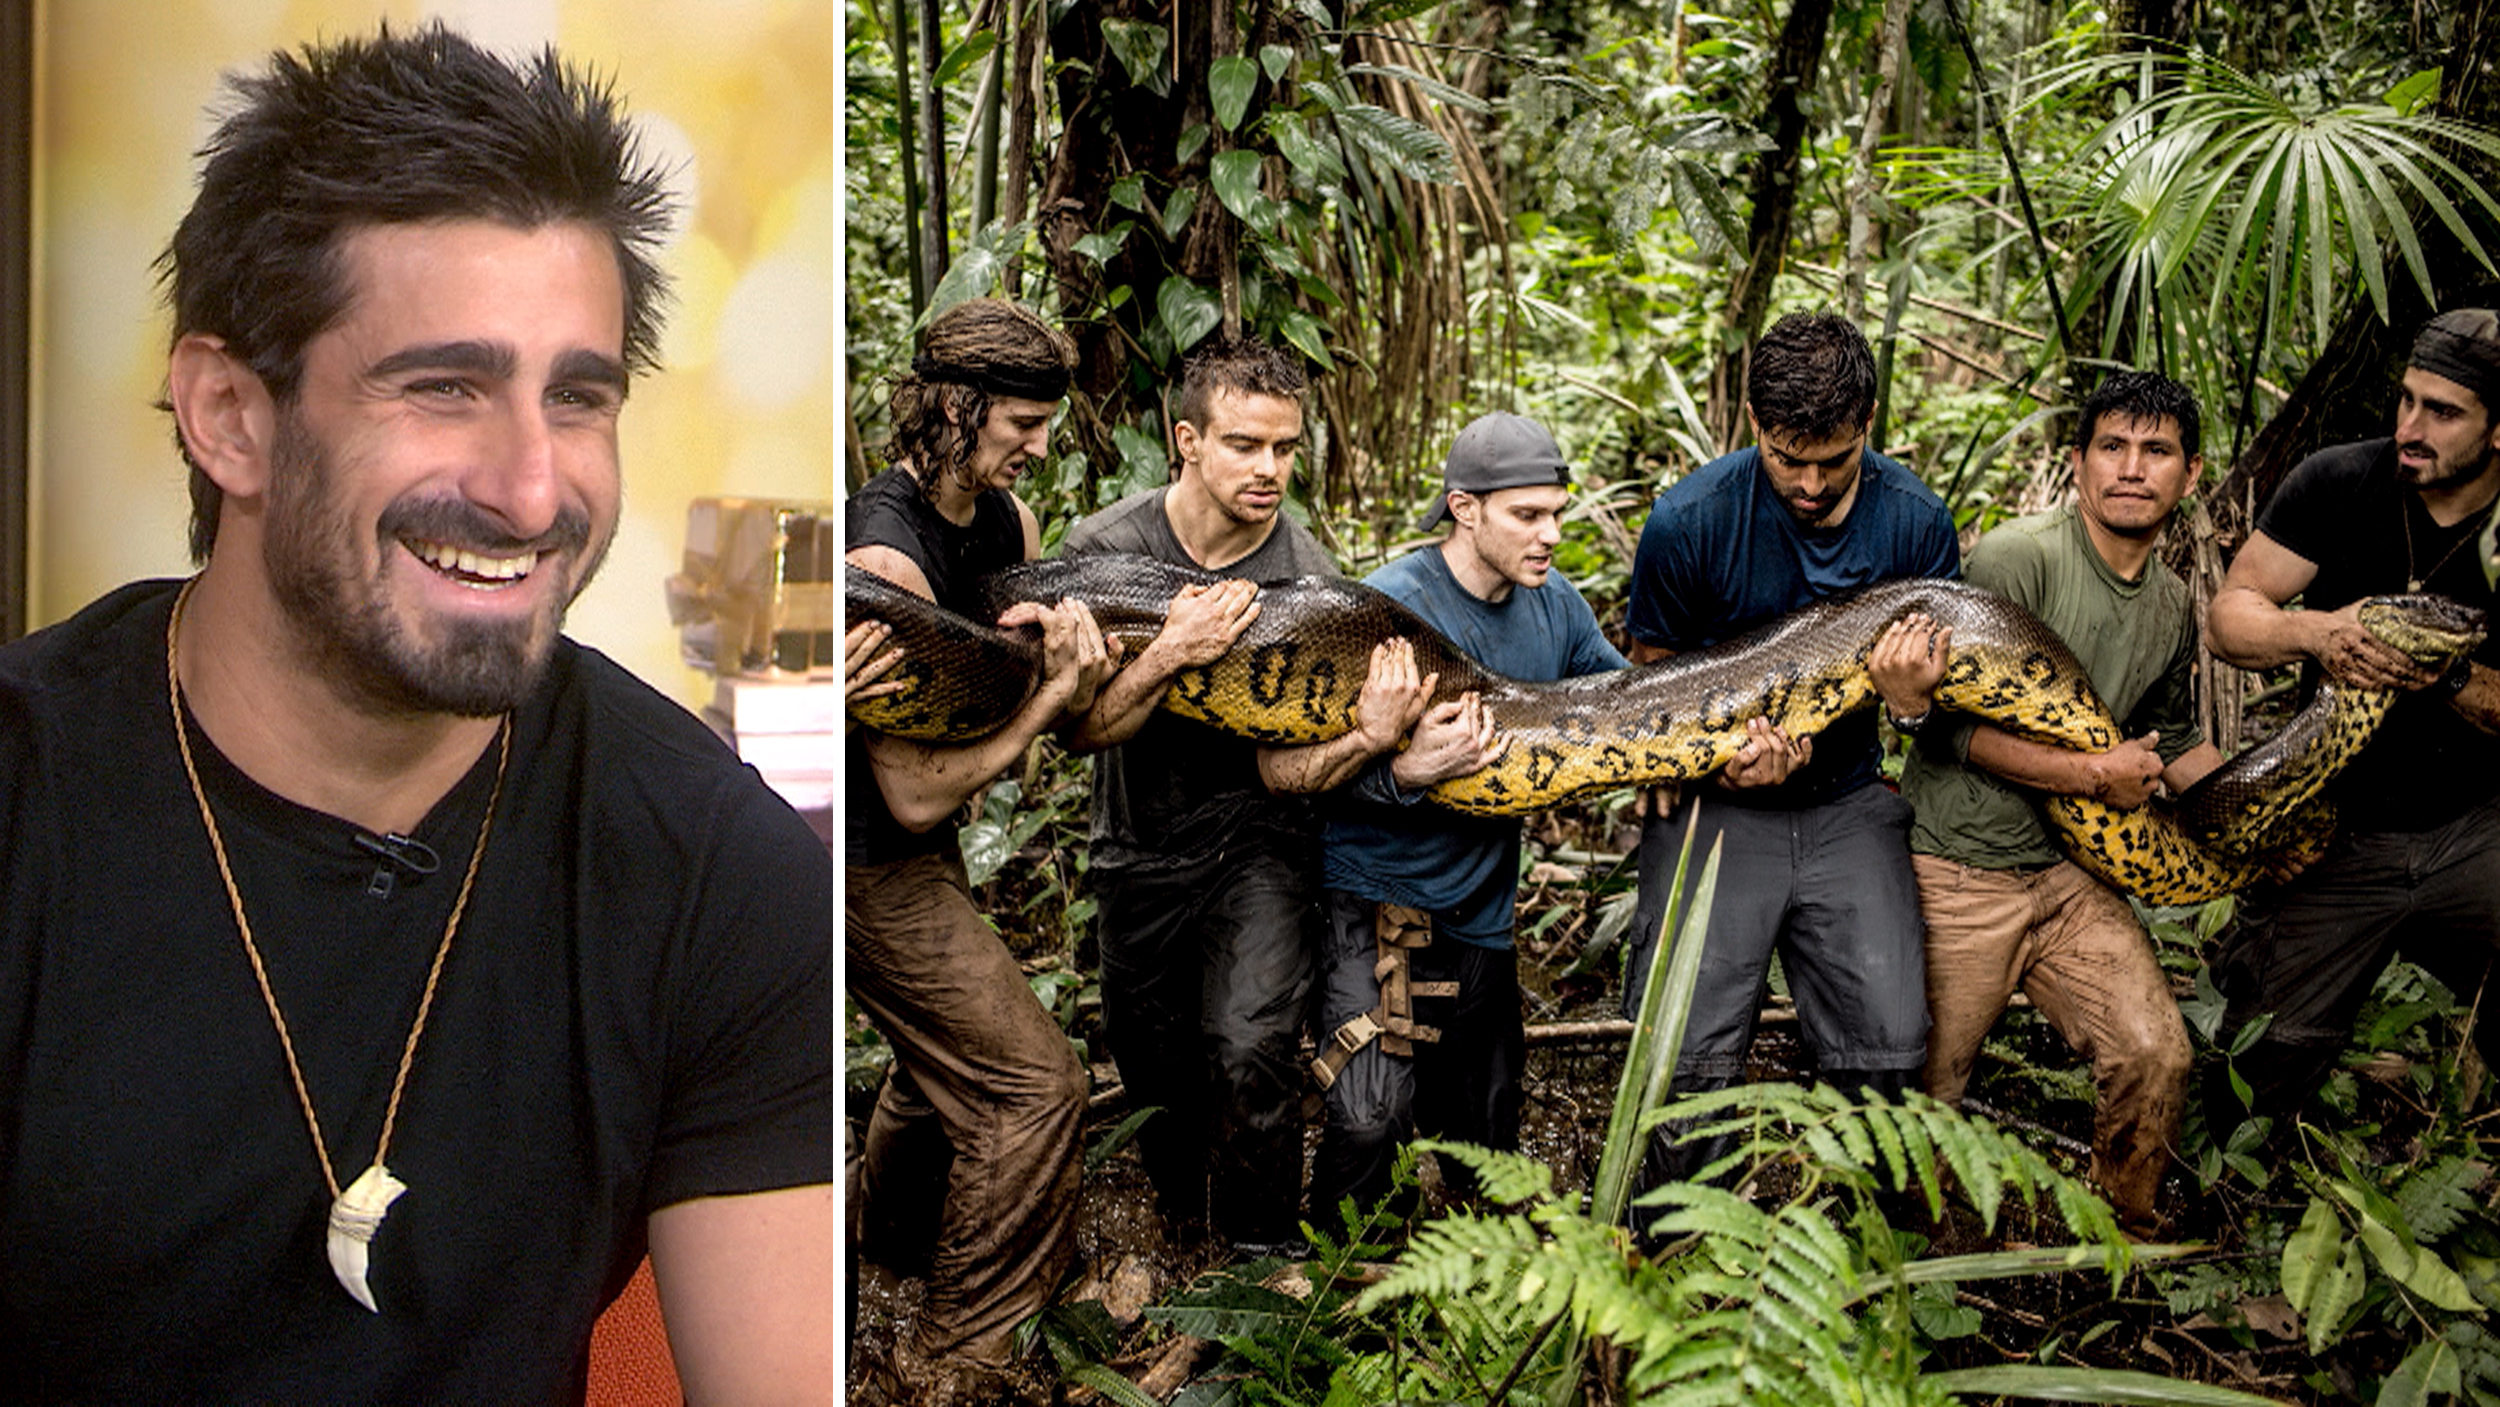 Man 'Eaten Alive' by anaconda explains why he did it — and how it felt